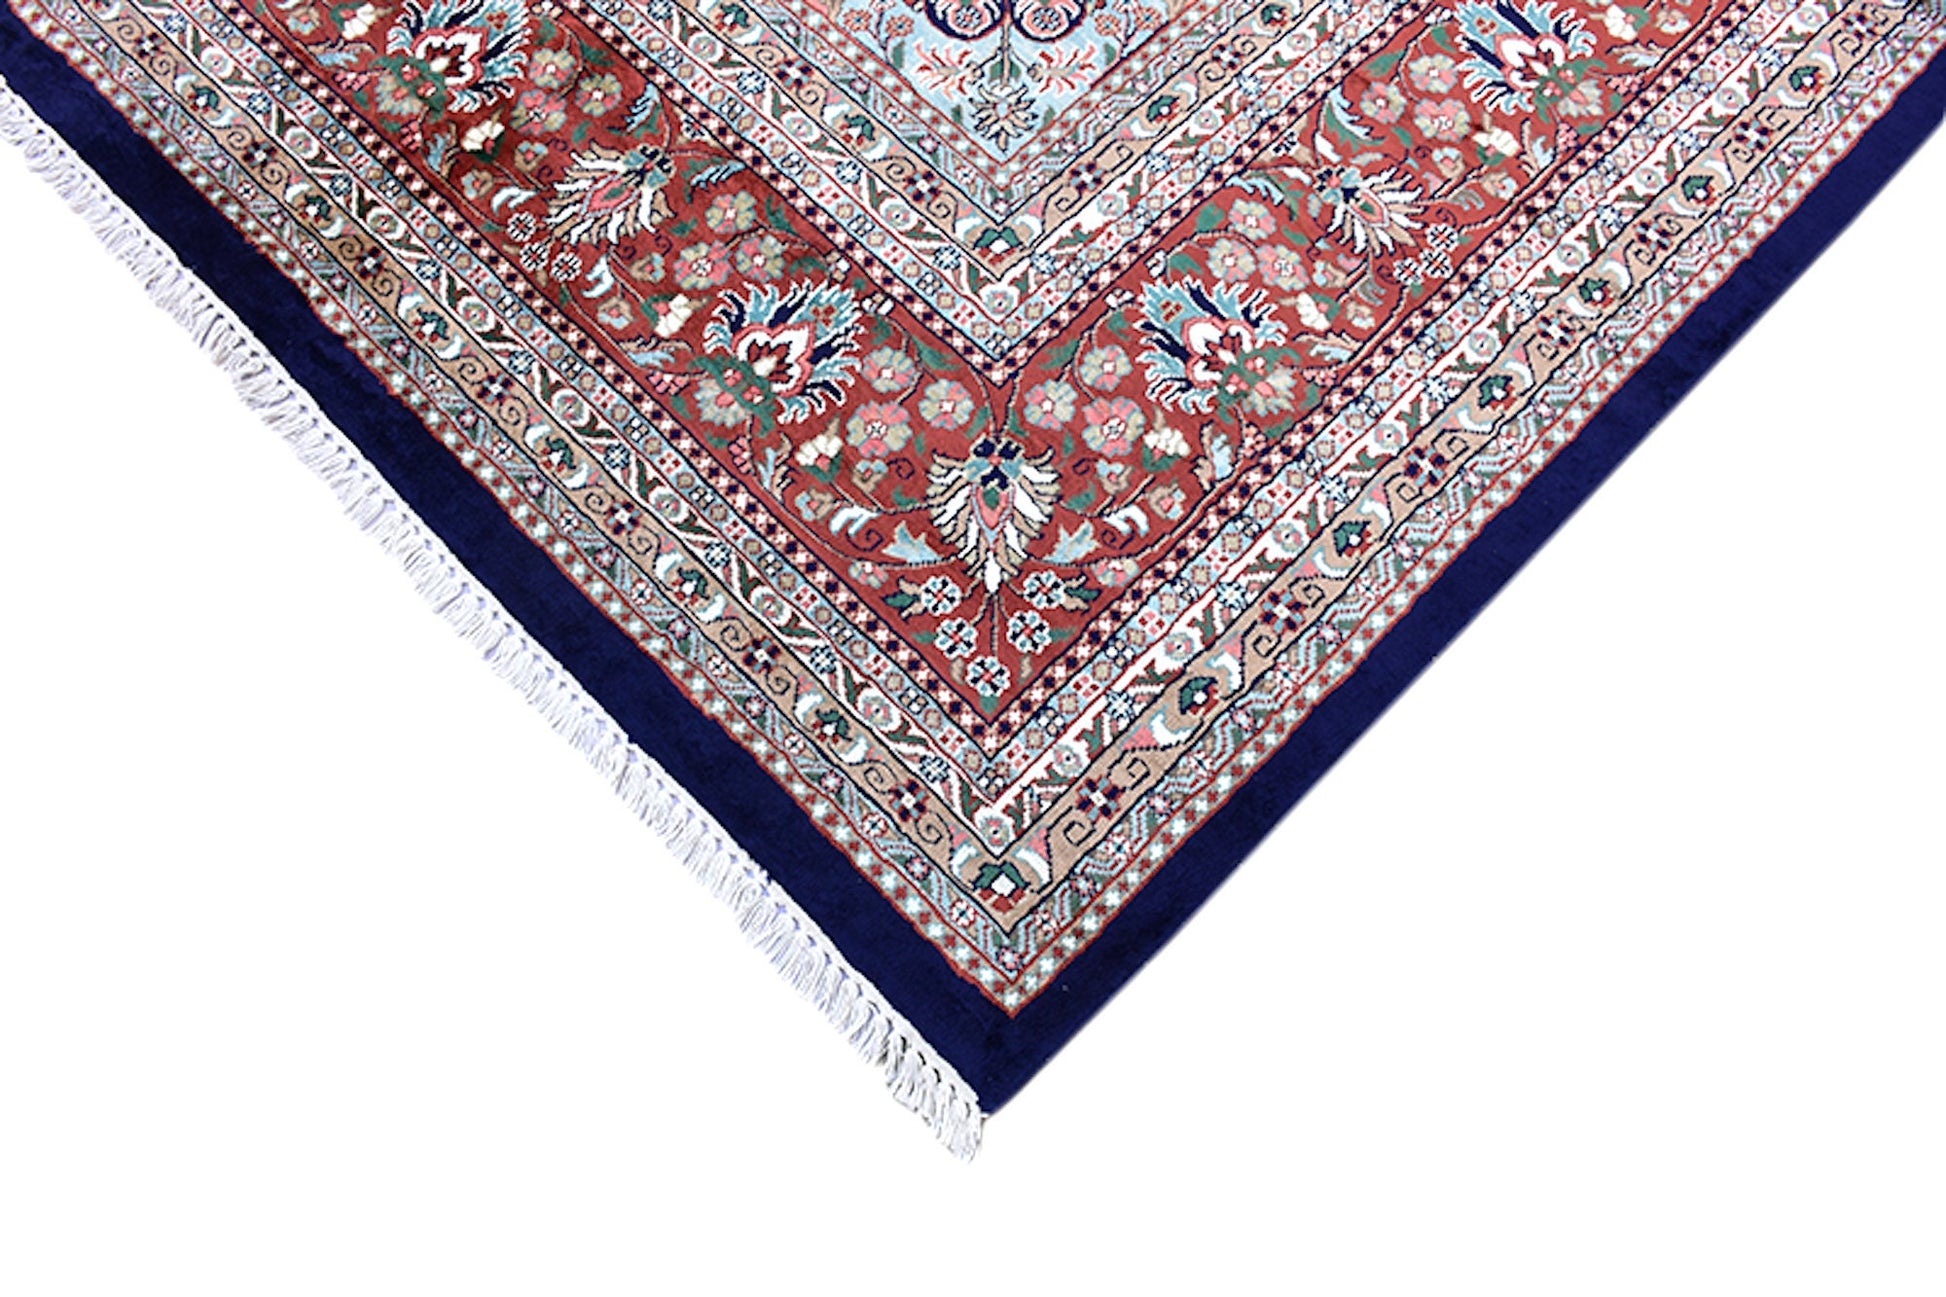 9 x 12 Feet Colorful Floral Medallion Rug | Hand Woven Area Rug | Oriental Persian Caucasian Rug | Living Room Rug| Wool Traditional Vintage